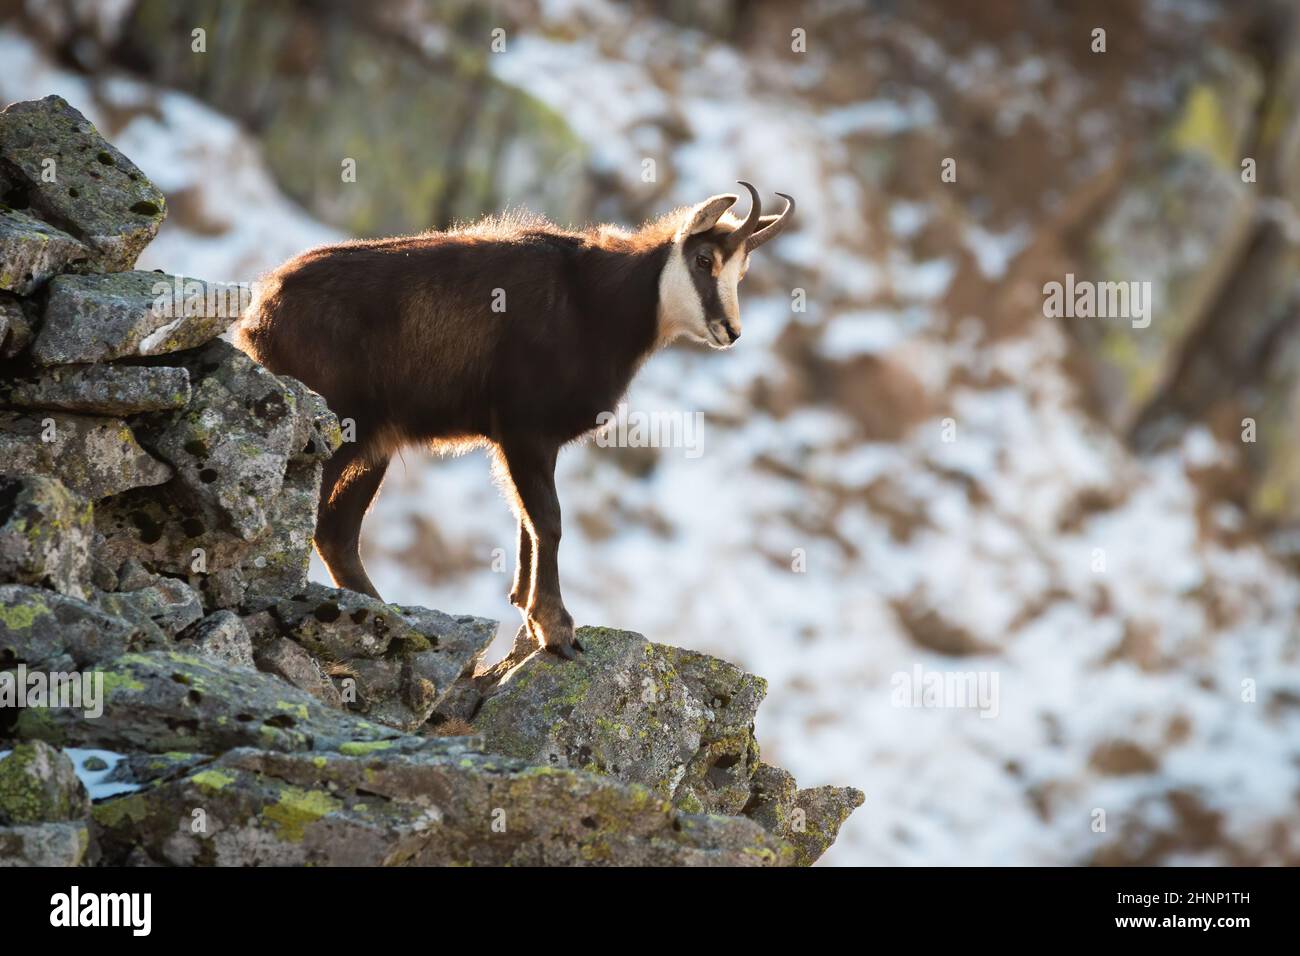 Tatra chamois, rupicapra rupicapra tatrica, climbing on stones in wintertime nature. Wild goat standing on moutains in sunlight. Horned mammal looking Stock Photo